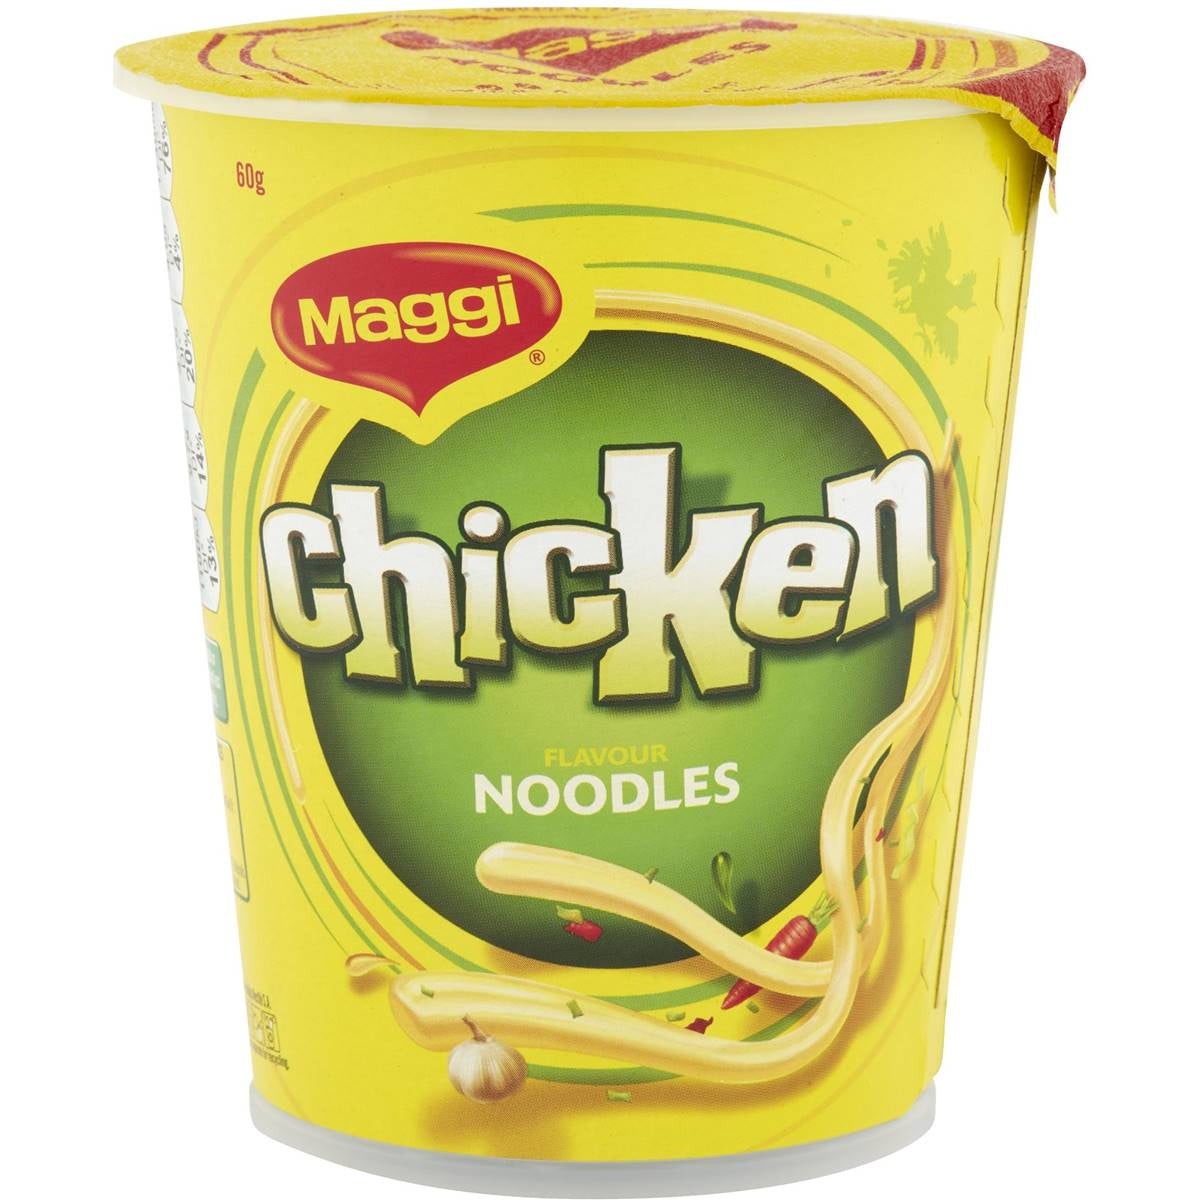 Maggi 2 Minute Noodles Chicken Single Cup 60g